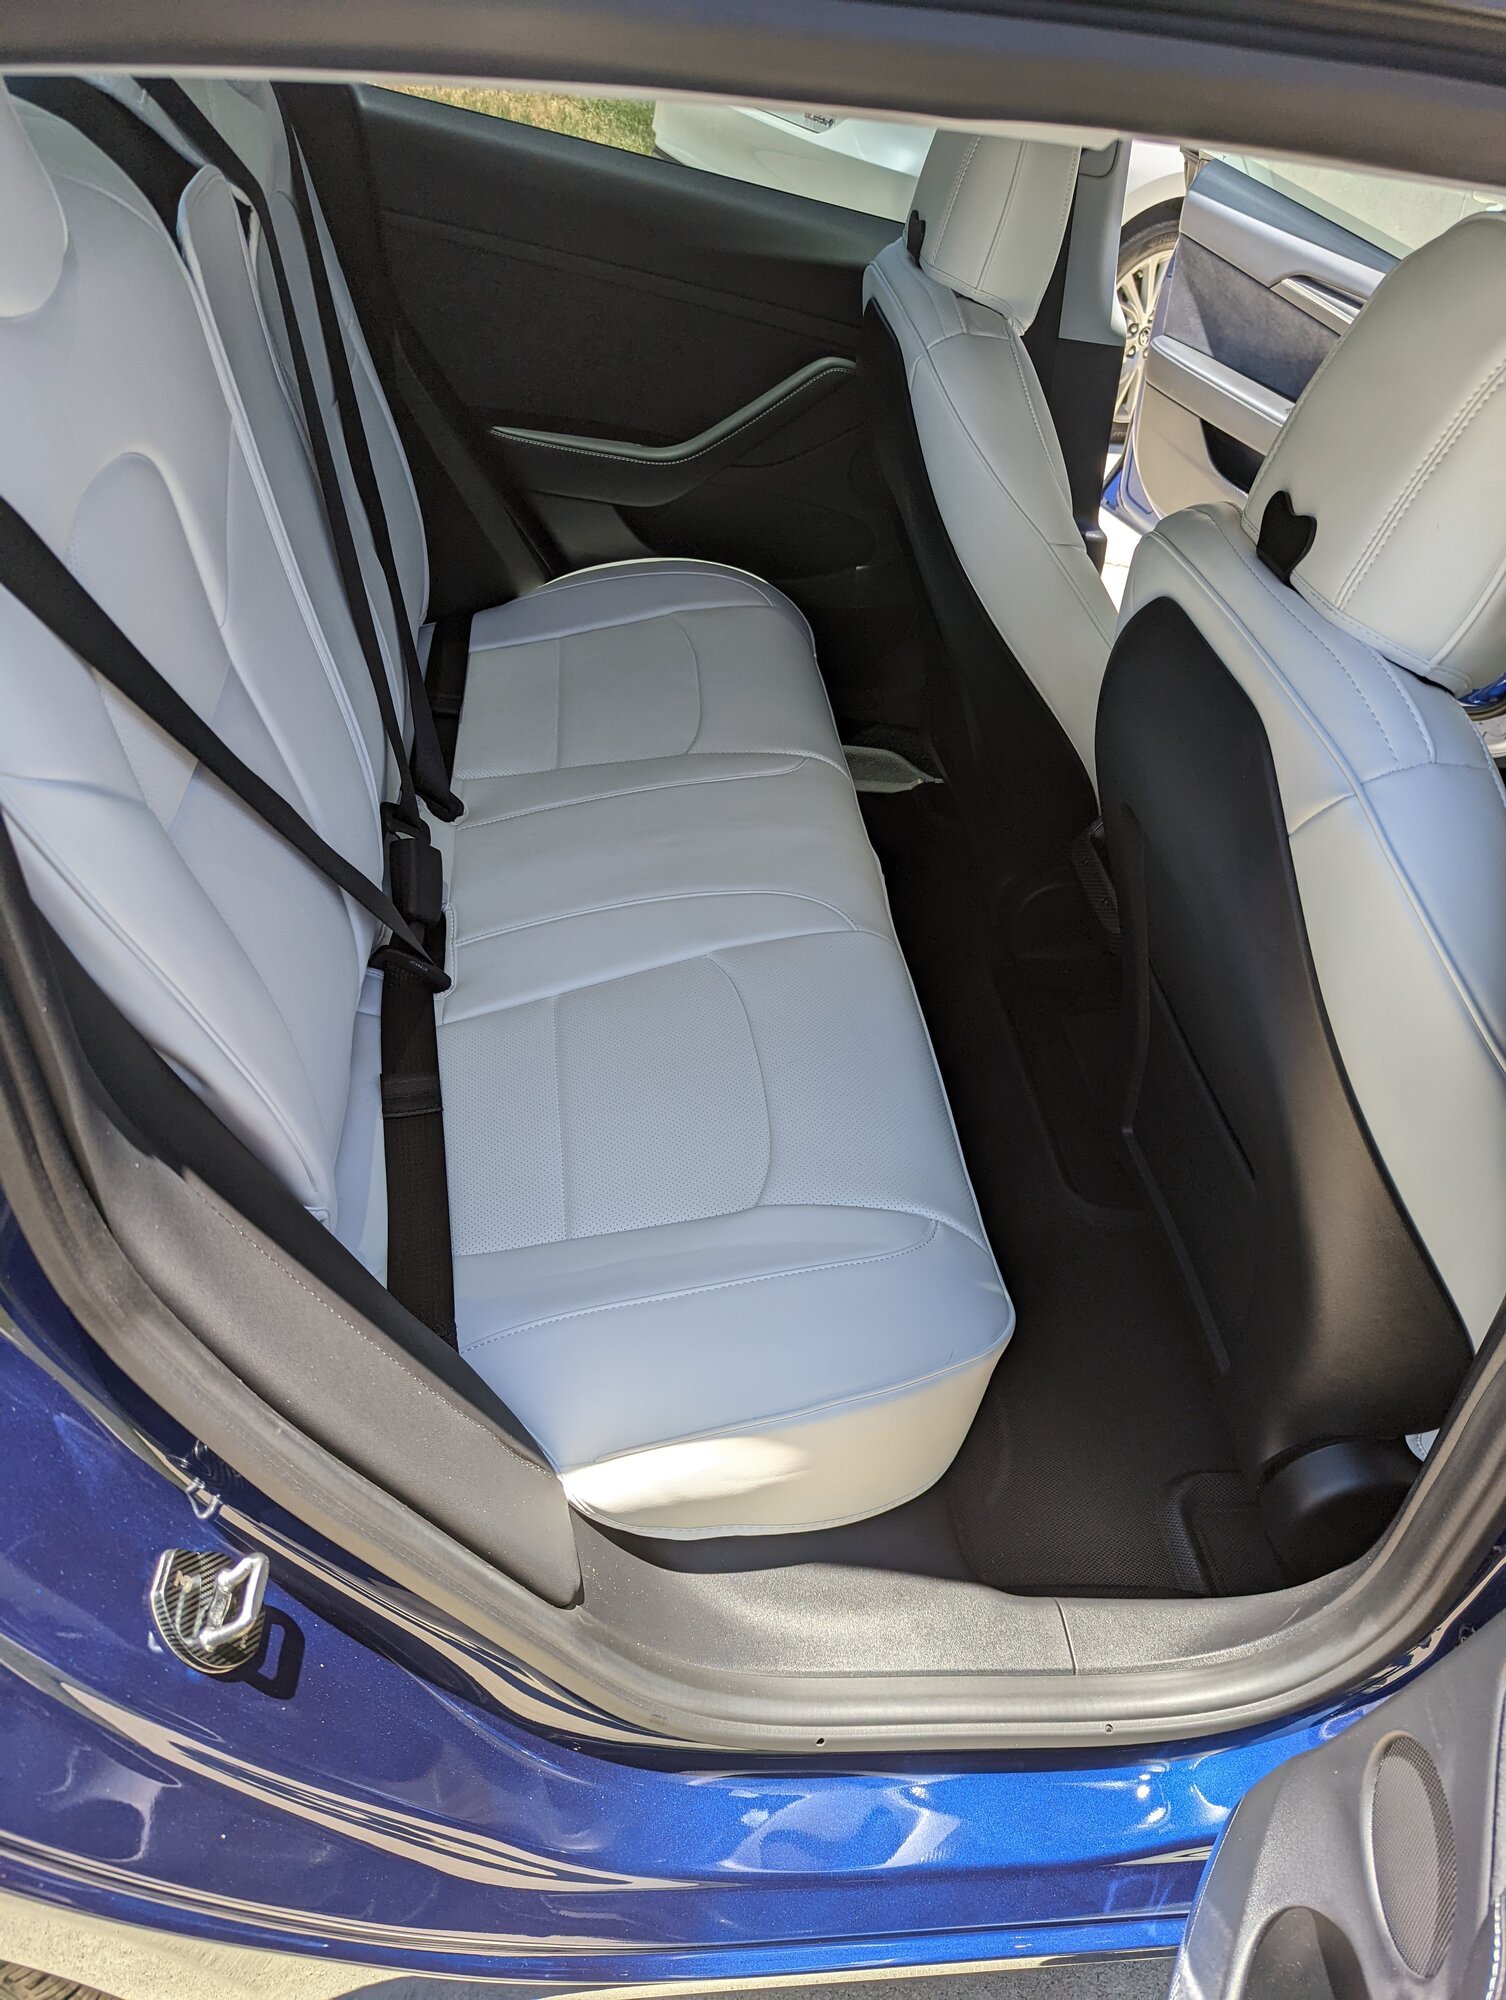 TAPTES perforated, NAPA leather seat covers for M3 install (Pics)